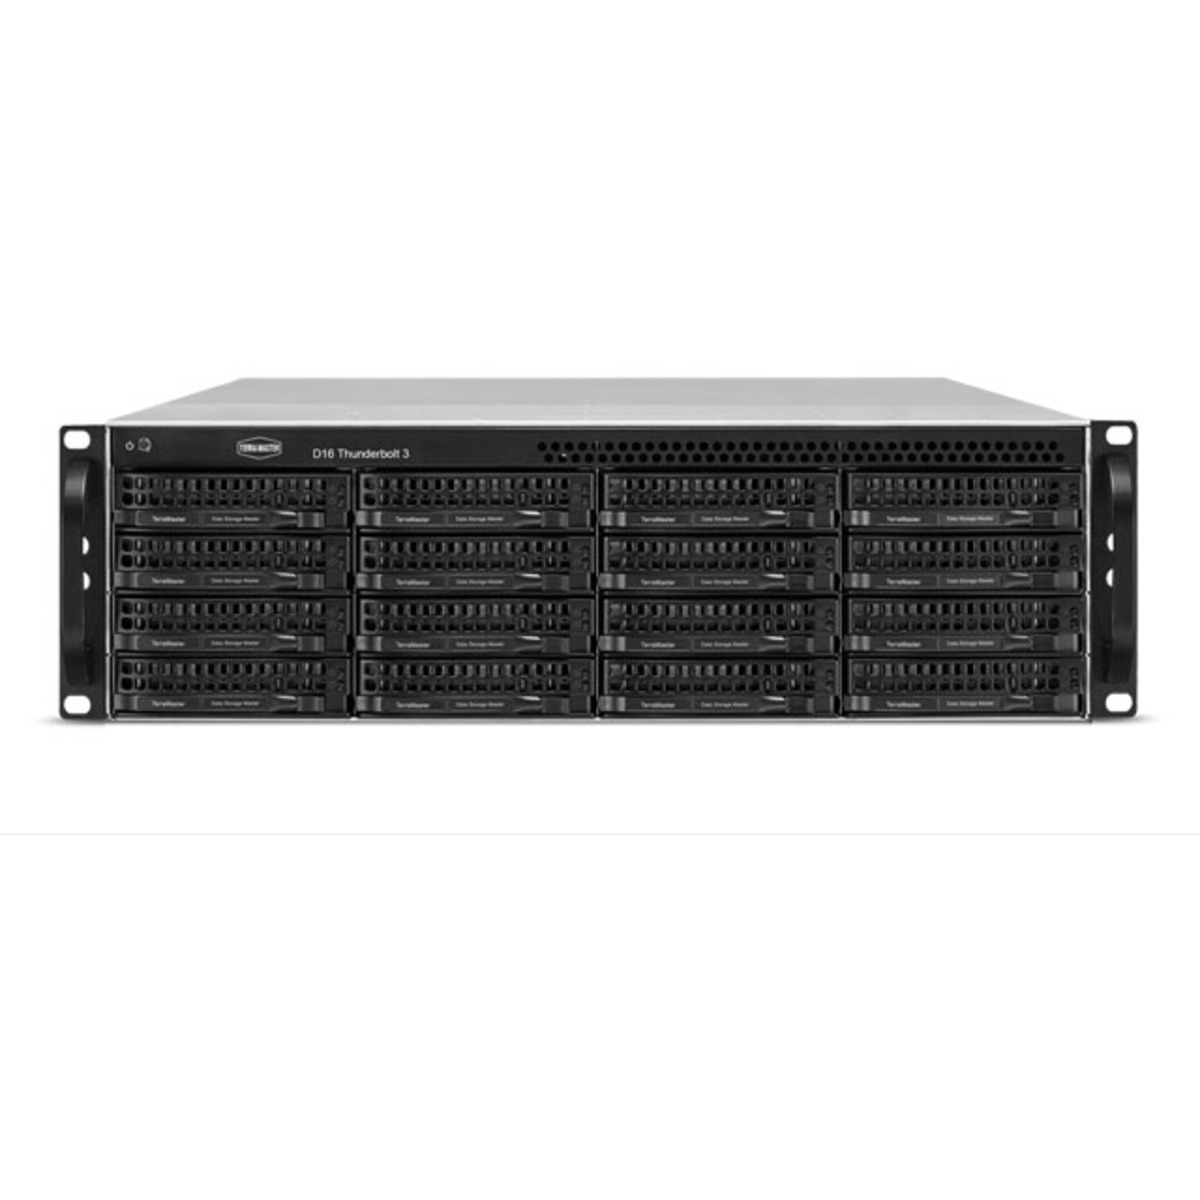 TerraMaster D16 Thunderbolt 3 120tb 16-Bay RackMount Multimedia / Power User / Business DAS - Direct Attached Storage Device 12x10tb Seagate IronWolf ST10000VN000 3.5 7200rpm SATA 6Gb/s HDD NAS Class Drives Installed - Burn-In Tested D16 Thunderbolt 3